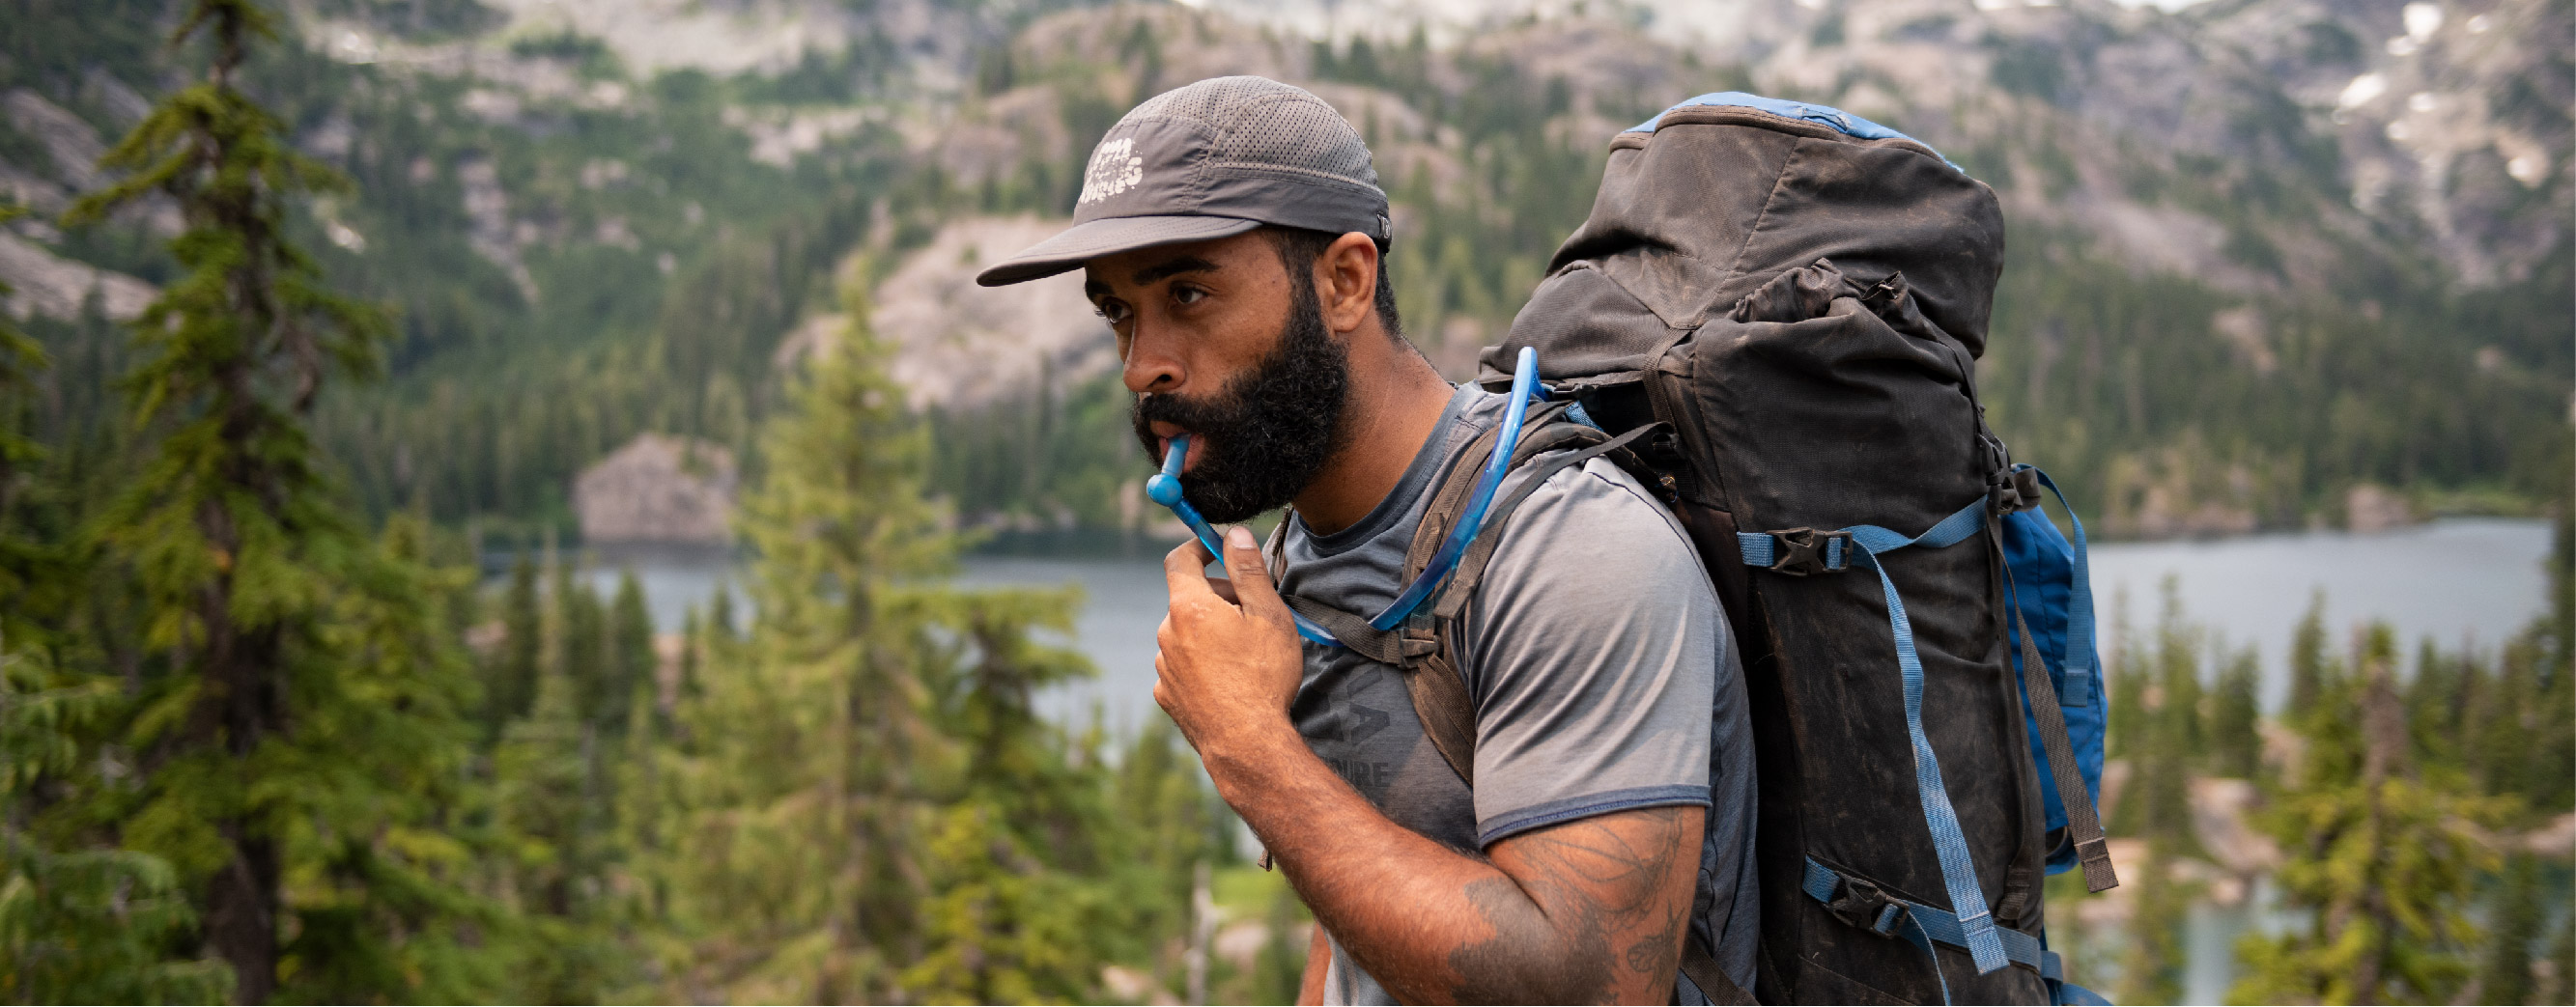 Backpacking - The gear that helps you get to where you want to be.